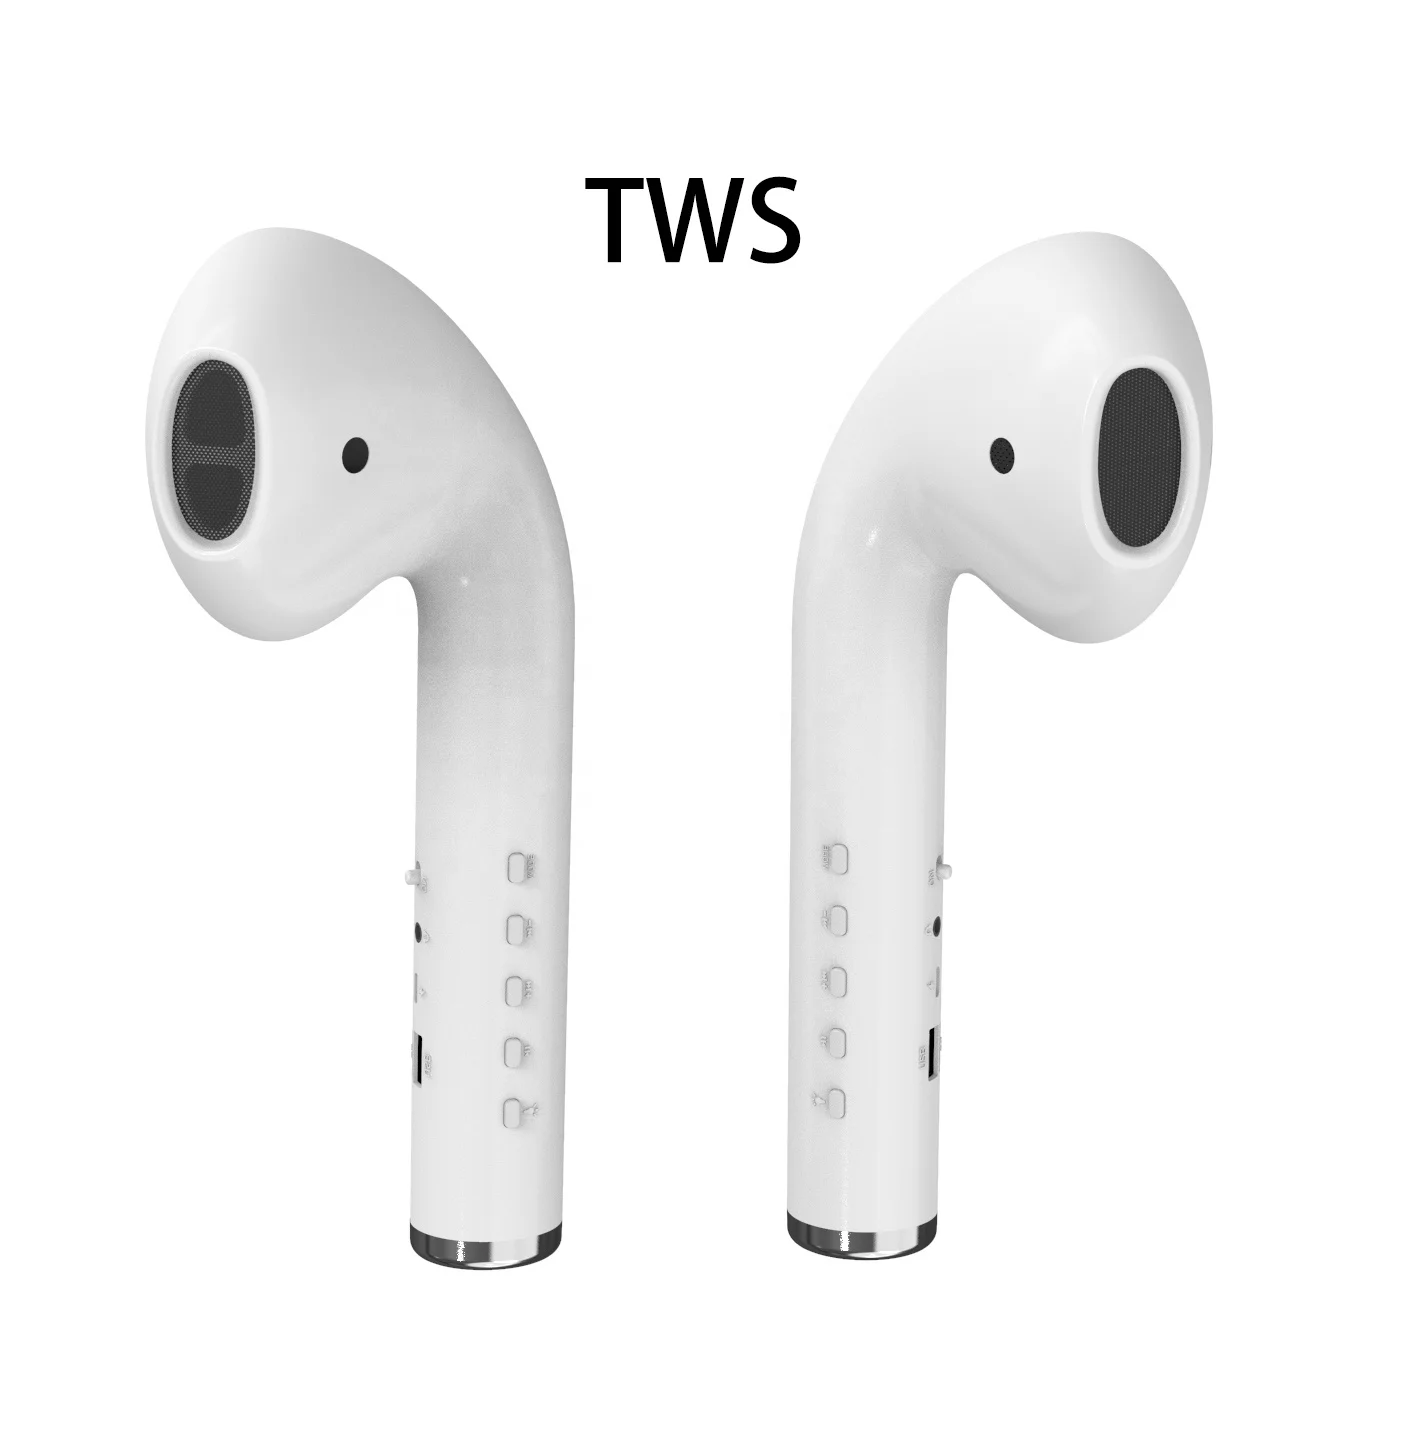 

OEM new arrival Big TWS earbuds Giant headset with bluetooth computer torch speaker